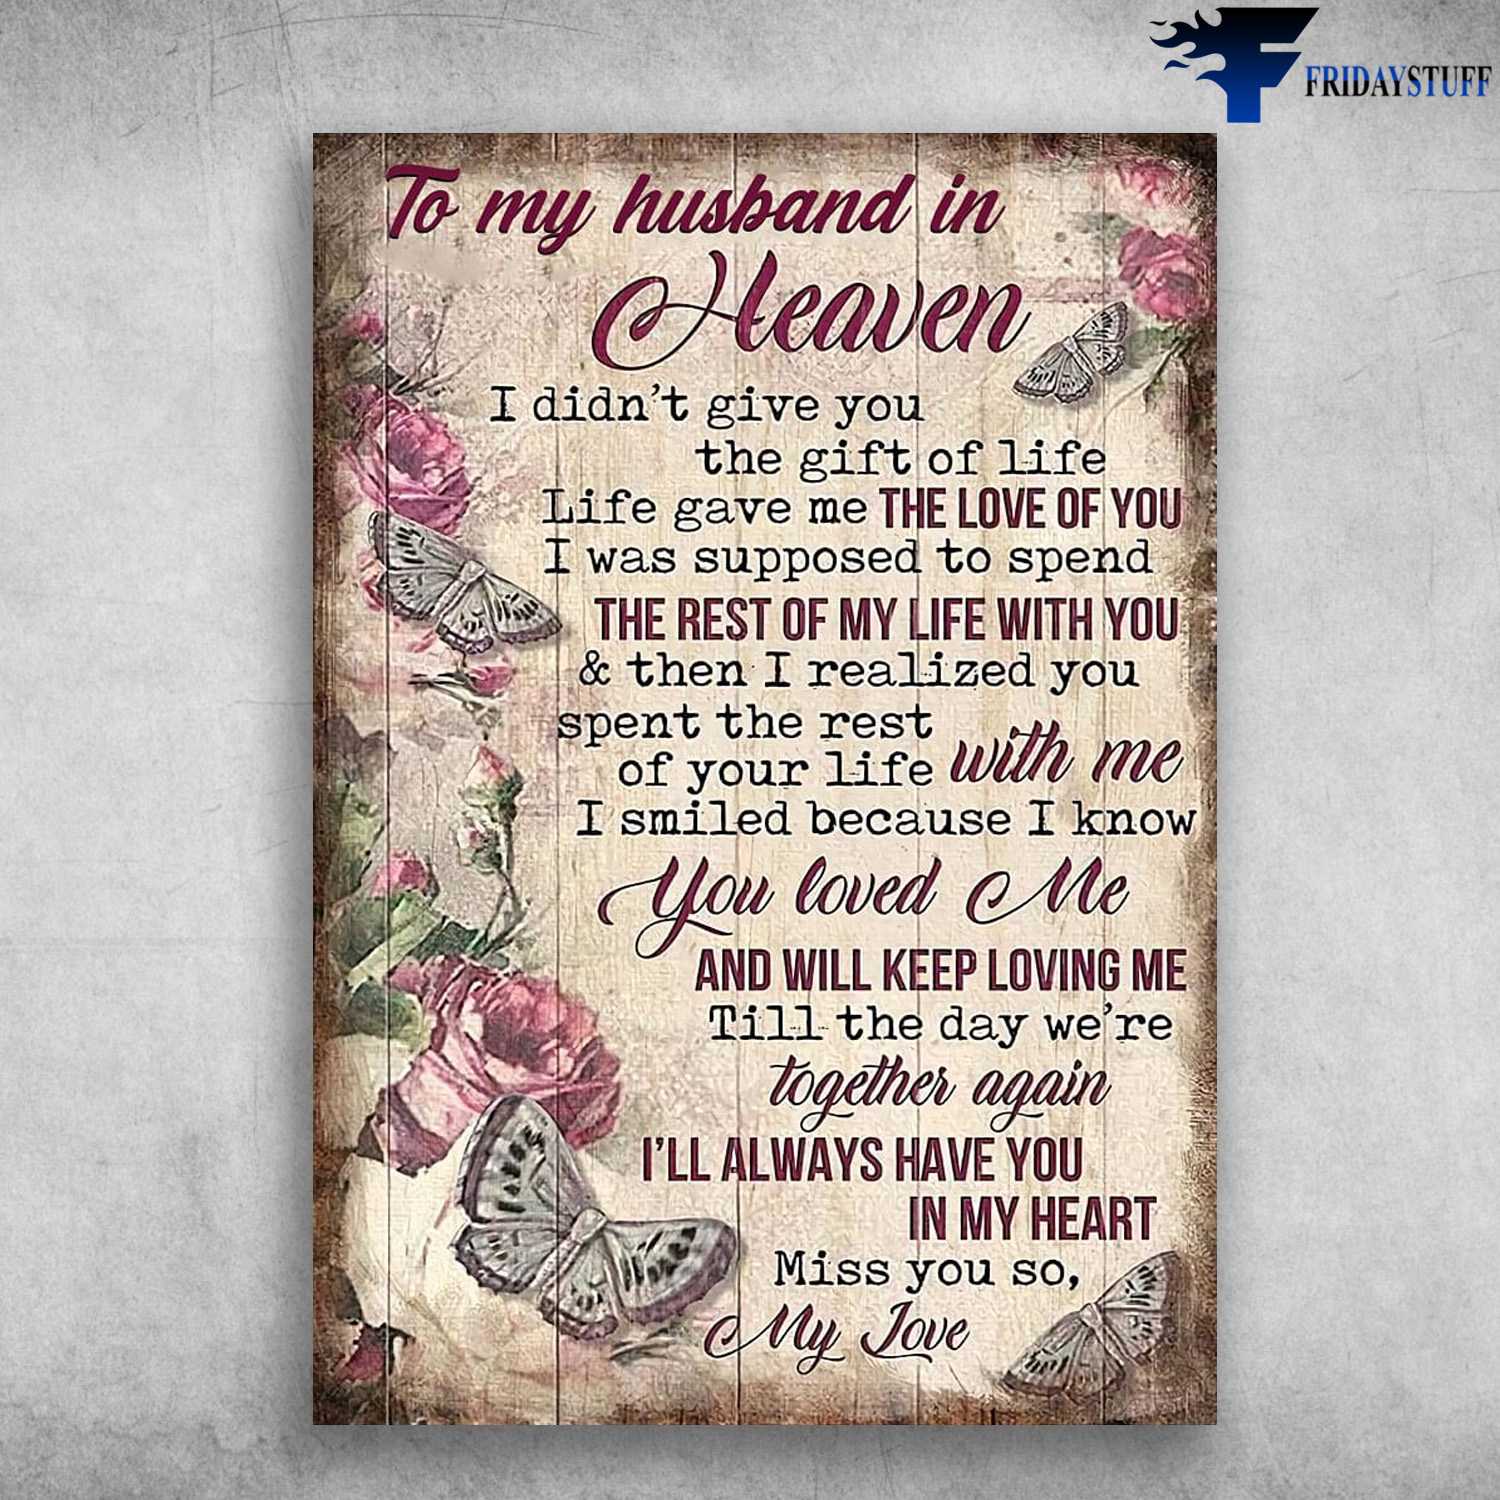 Angel Husband, Husband And Wife, To My Husband In Heaven, I Didn't Give You The Gift Of Life, Life Gave Me The Love Of You, I Was Supposed To Spend, The Rest Of My Life With You